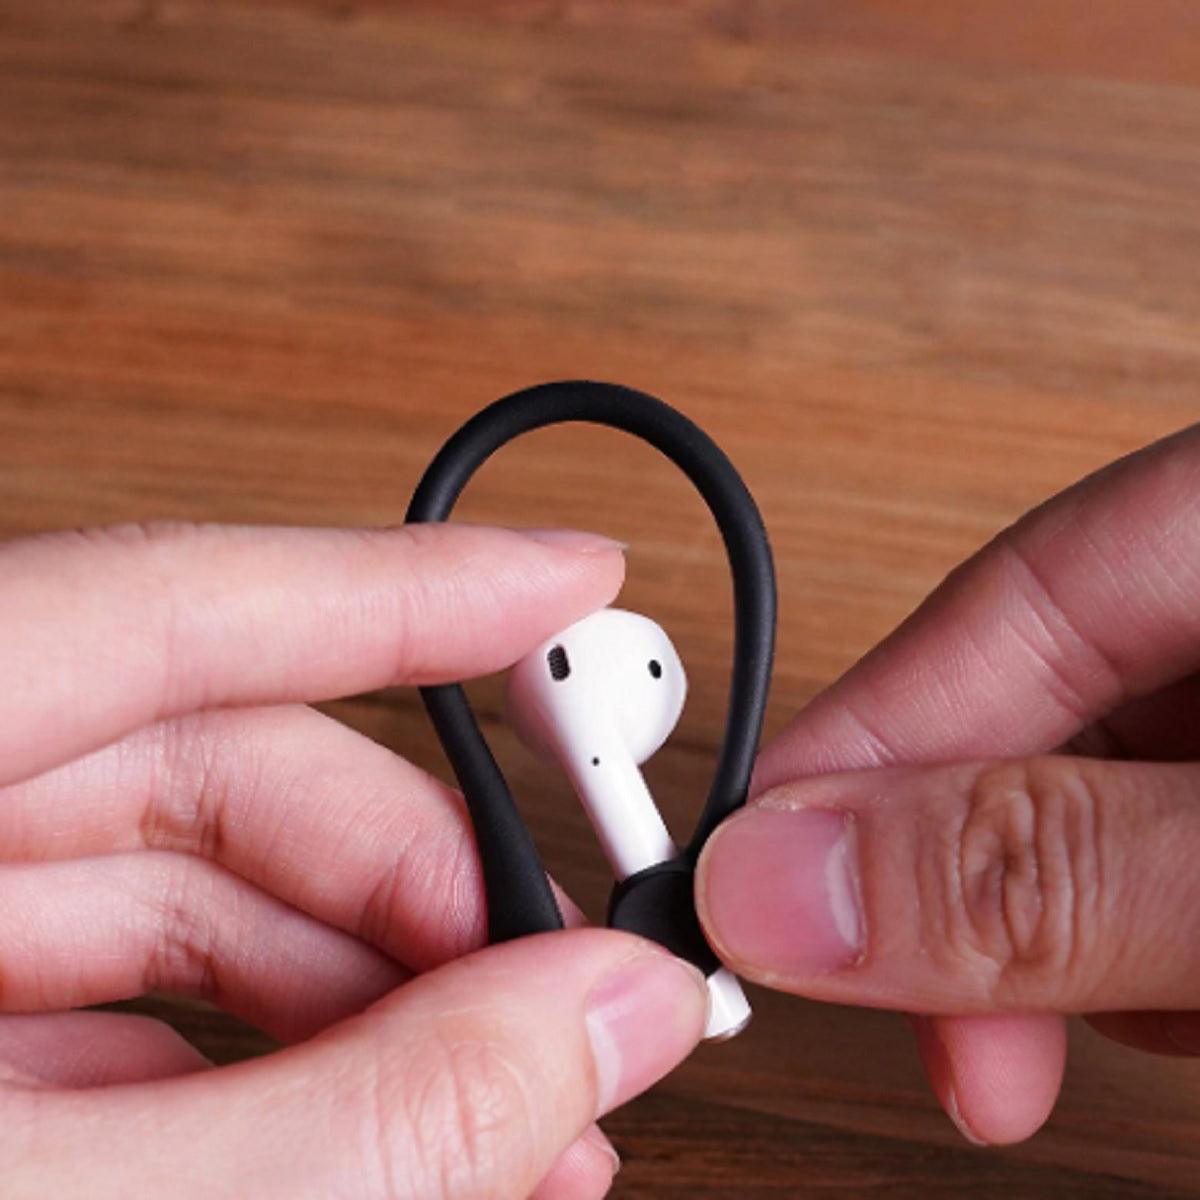 Anti Fall Silicone Earhooks for Apple Airpods - 1 Pair - dealskart.com.au